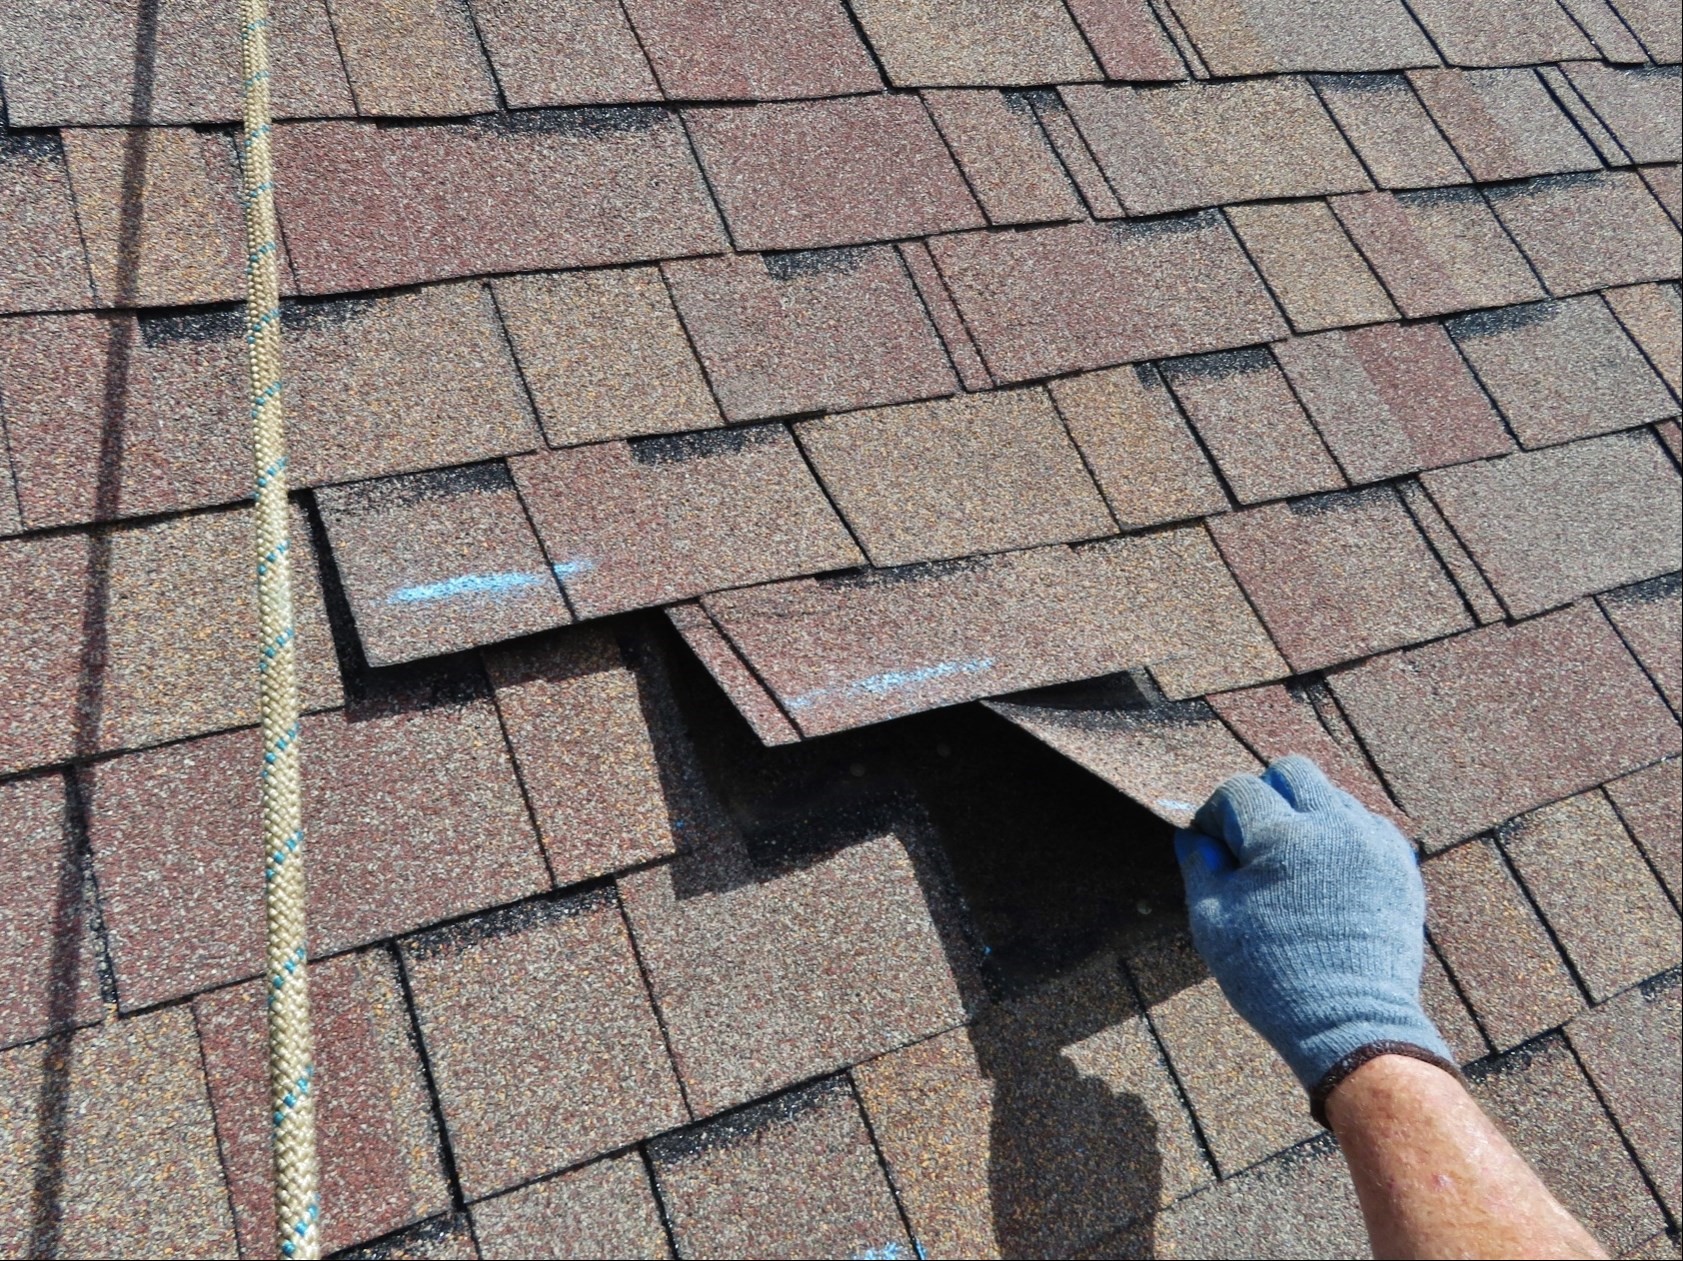 Lake Orion Roofing Will File Your Insurance Claim